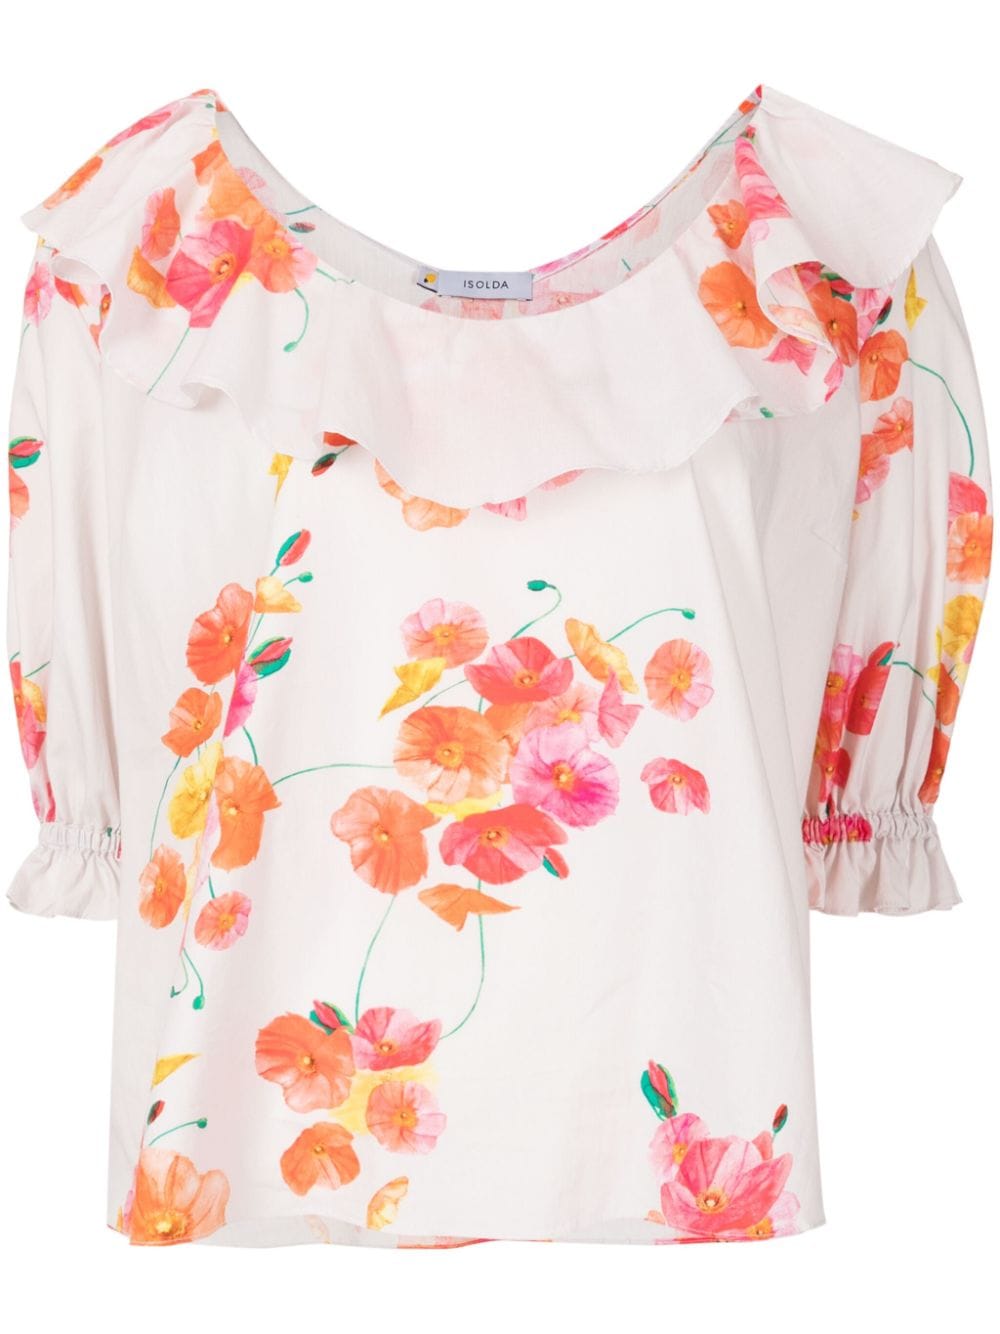 Poppies Field Forever ruffled blouse